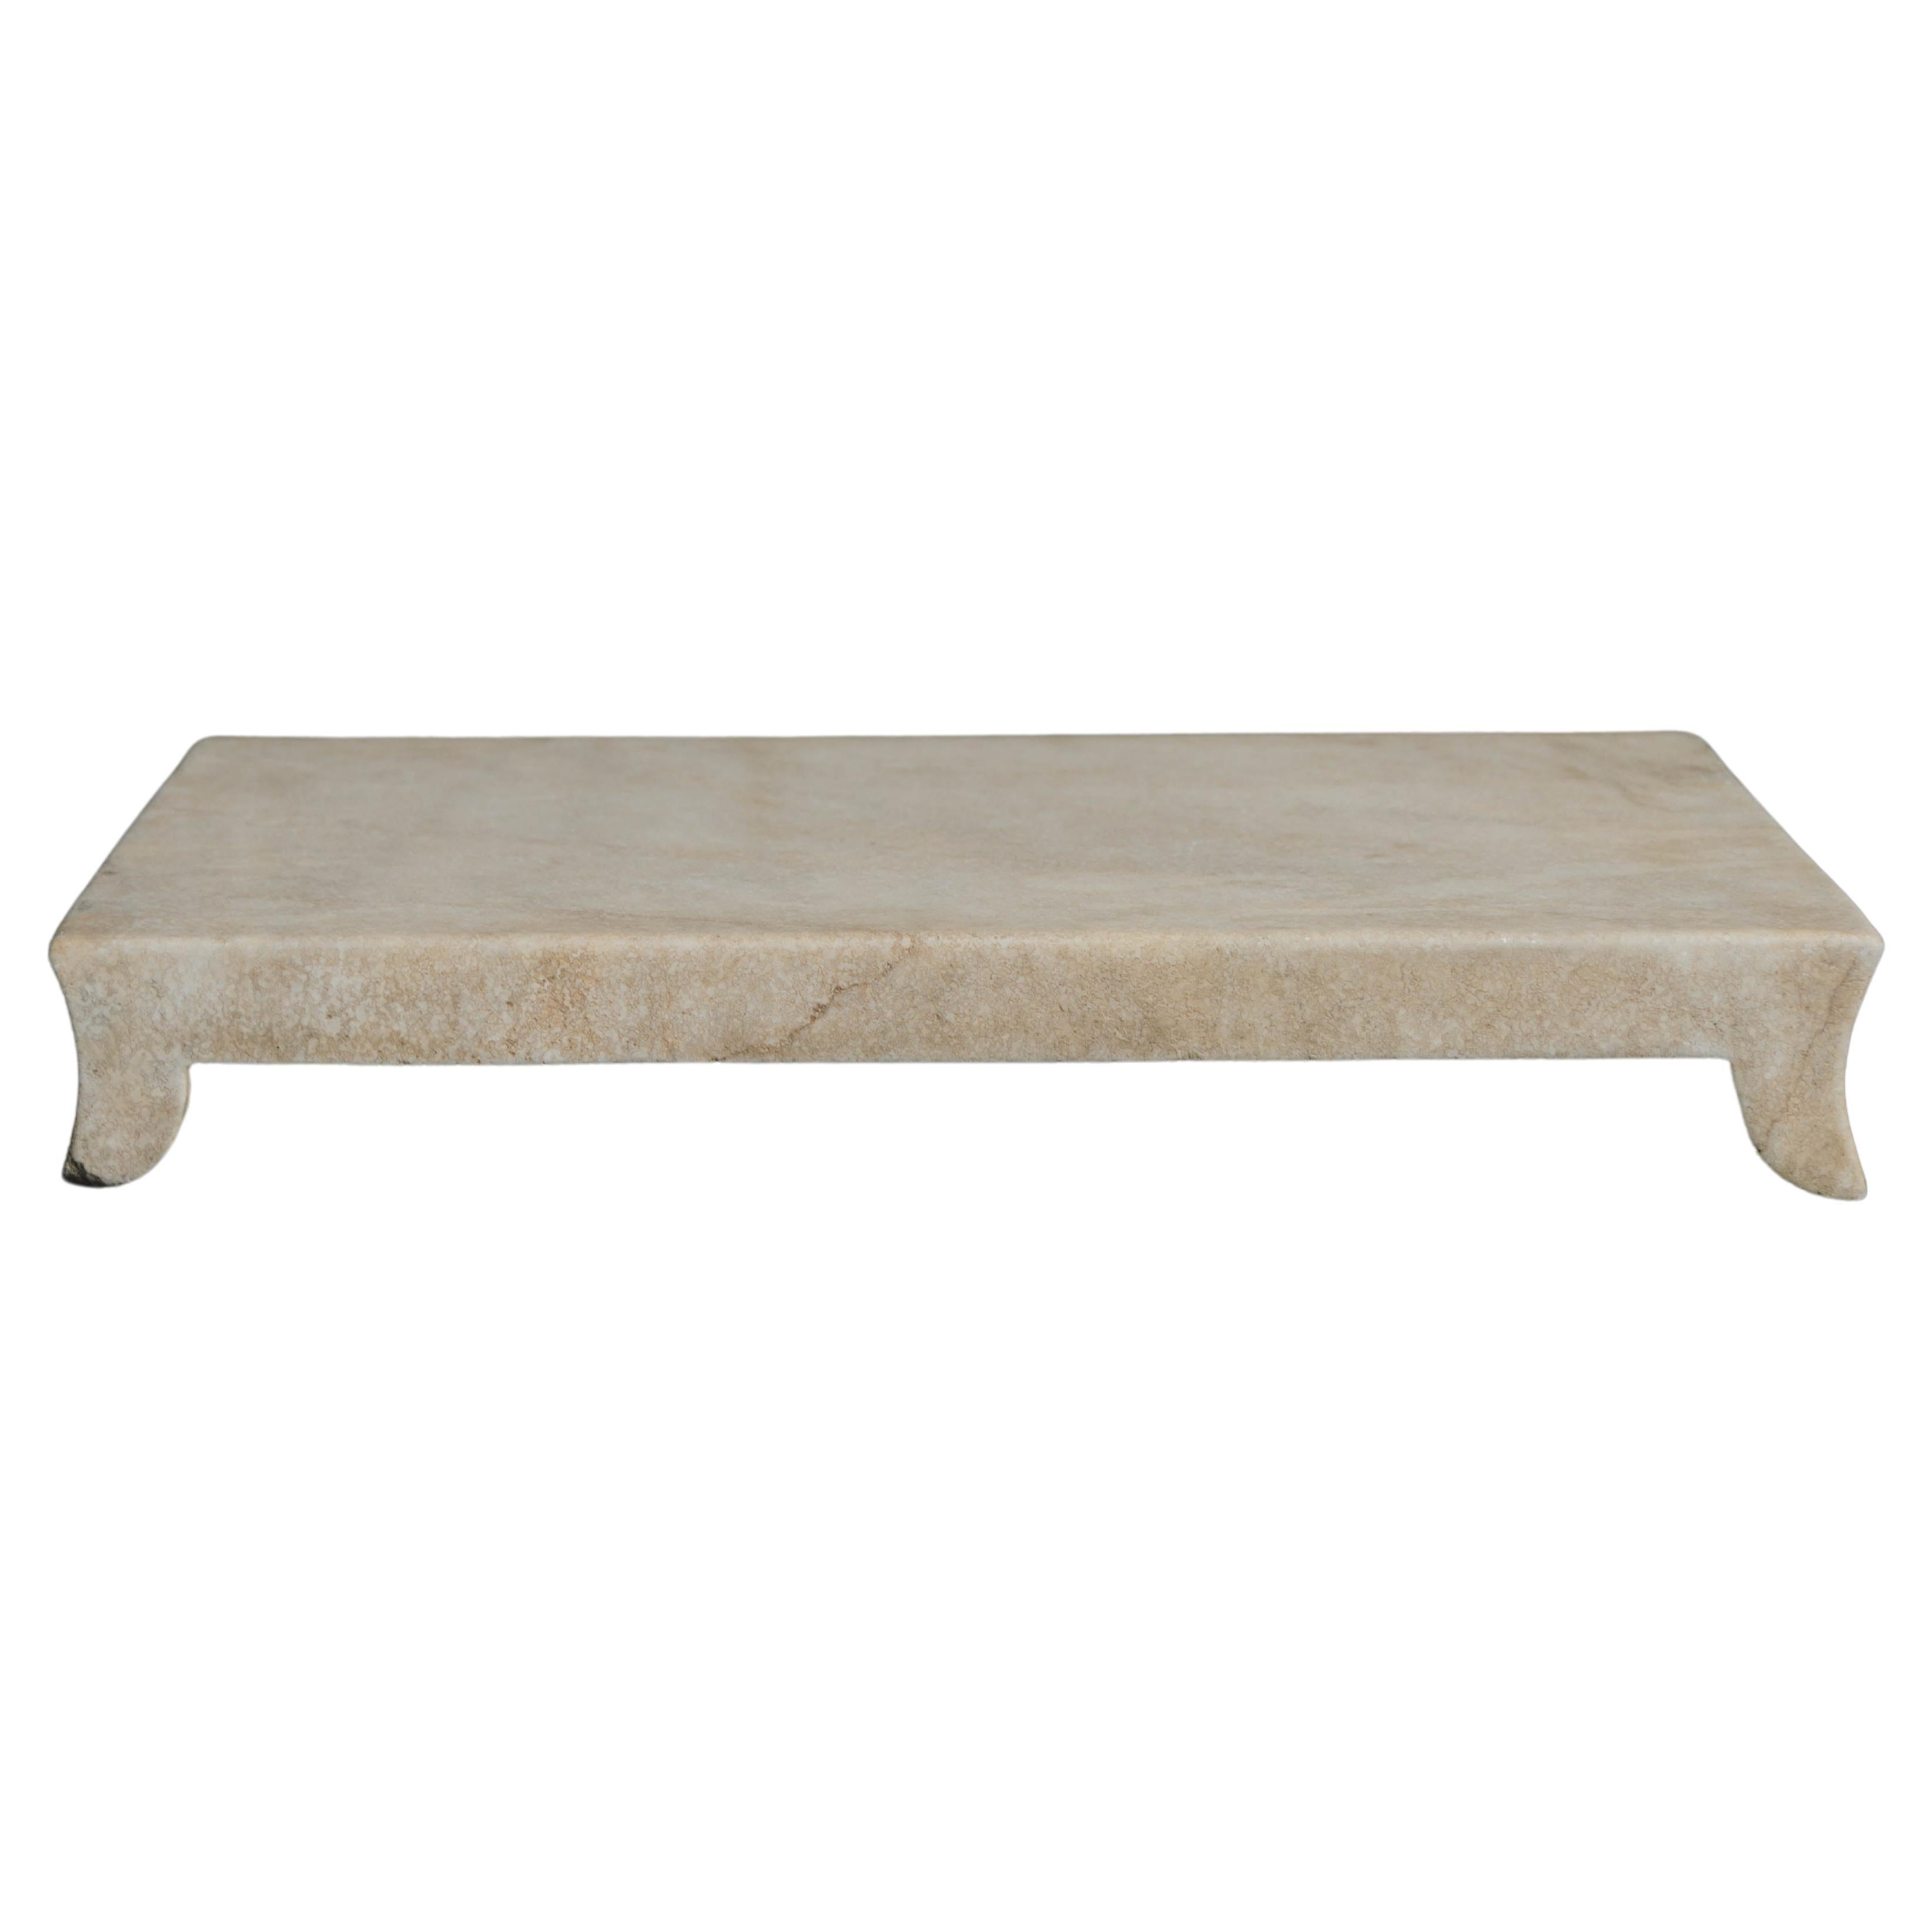 Han Bai Yu Stone Elevated Tray by Robert Kuo, Hand Carved, Limited Edition